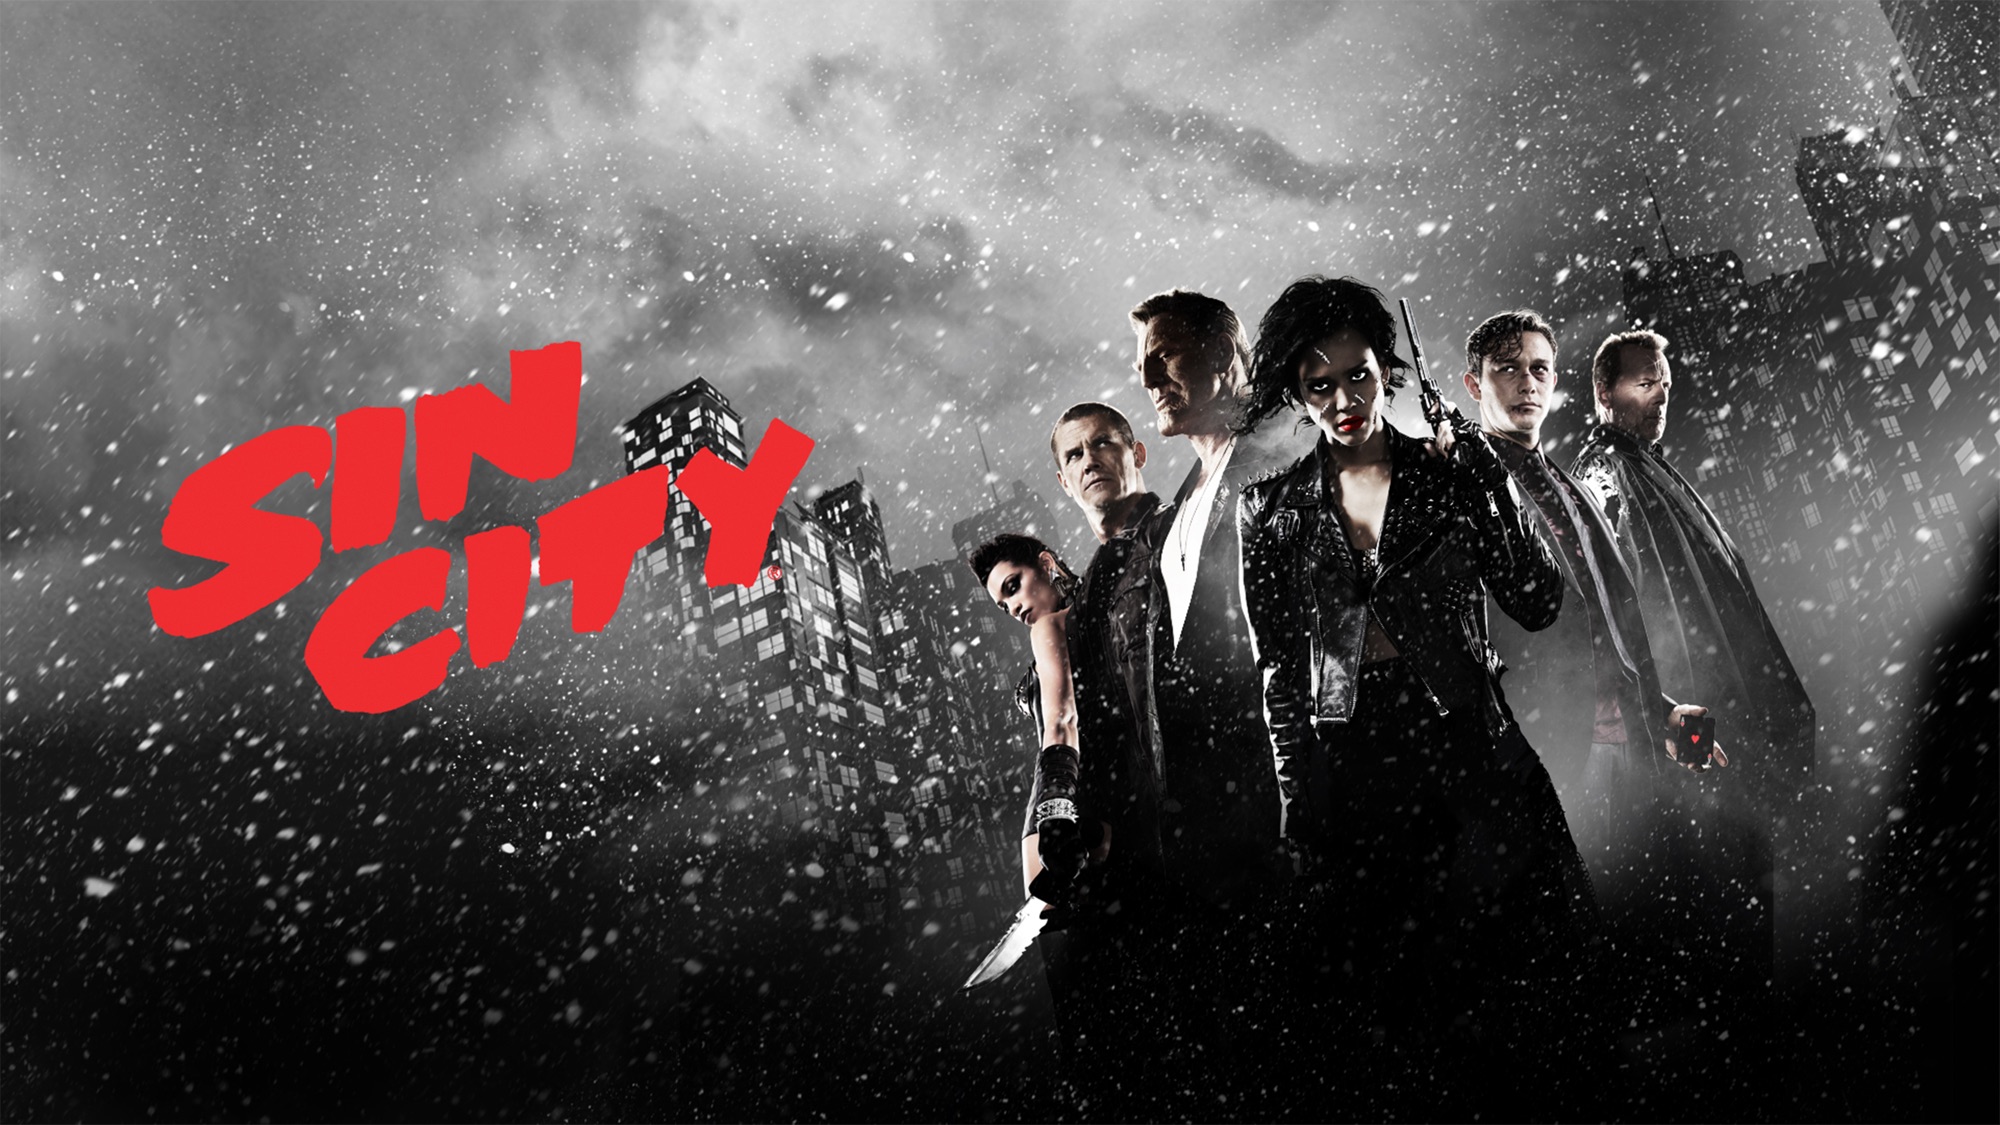 HD desktop wallpaper of Sin City: A Dame to Kill For movie.